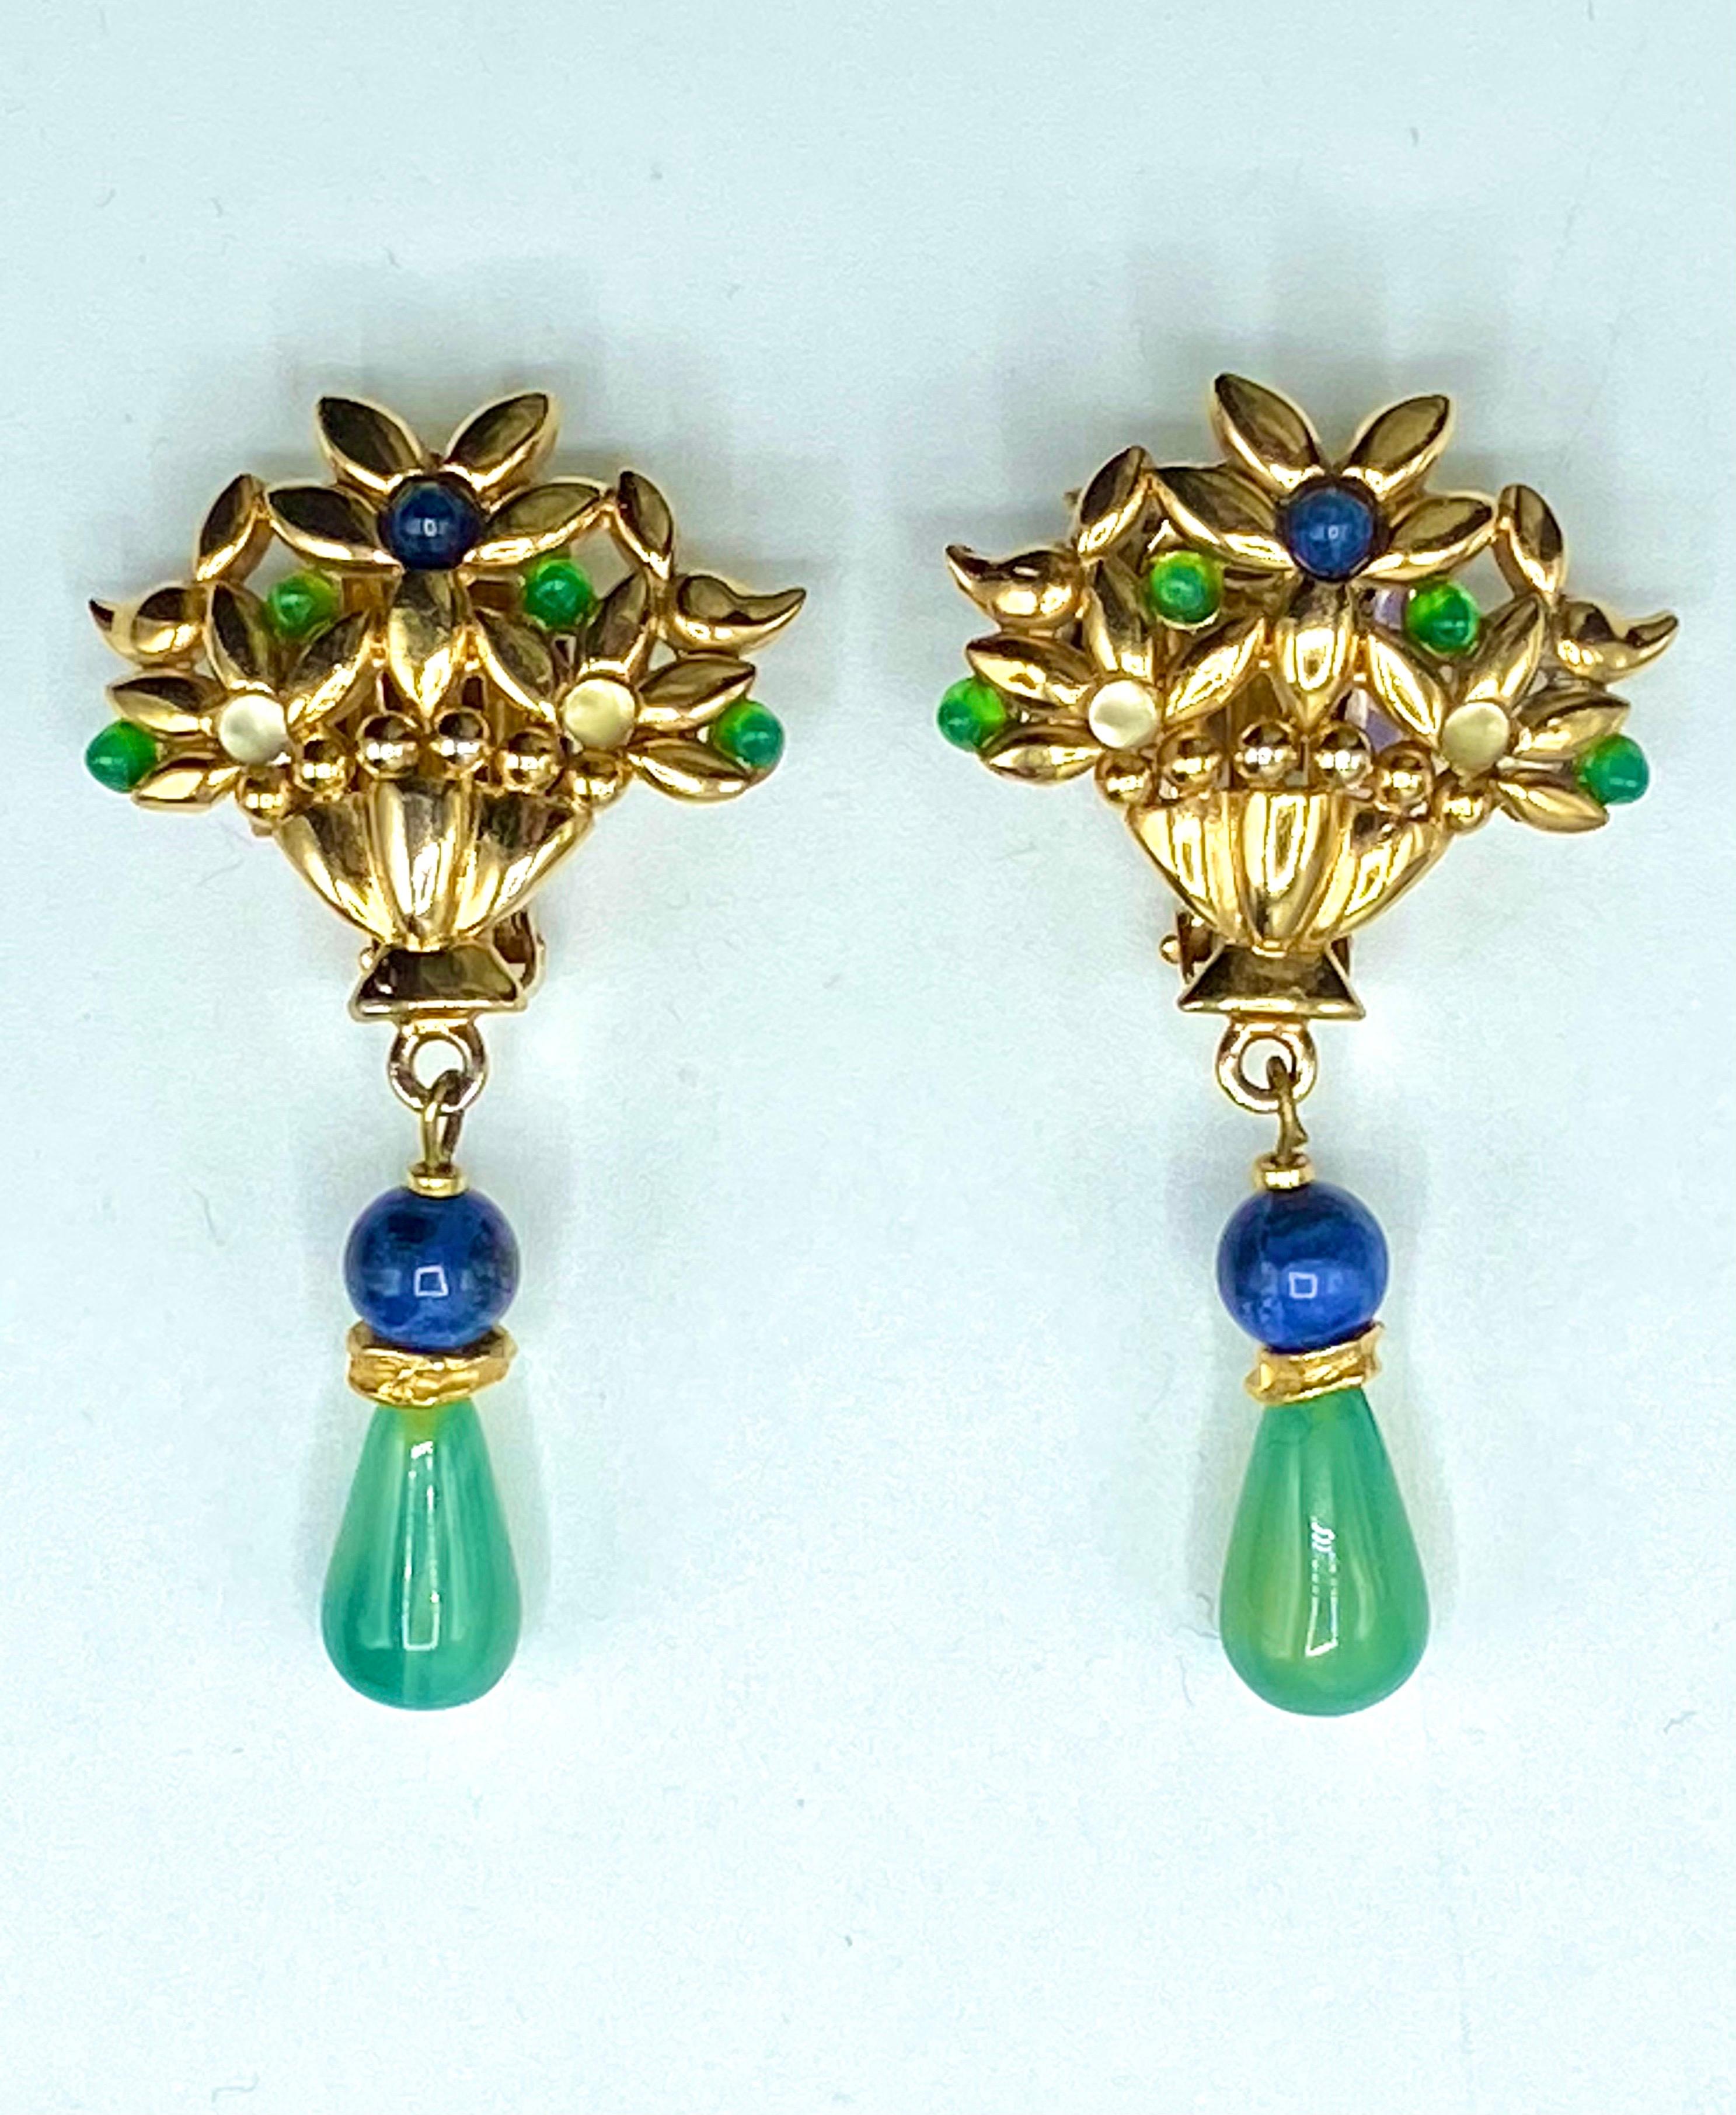 An early pair of Francesca Romana late 1980s to early 1990s giardinetti earrings. Giardinetti, Italian for little garden, is also a term used to describe jewelry, in particular brooches and earrings, in the form of flowers in vases or baskets. Each